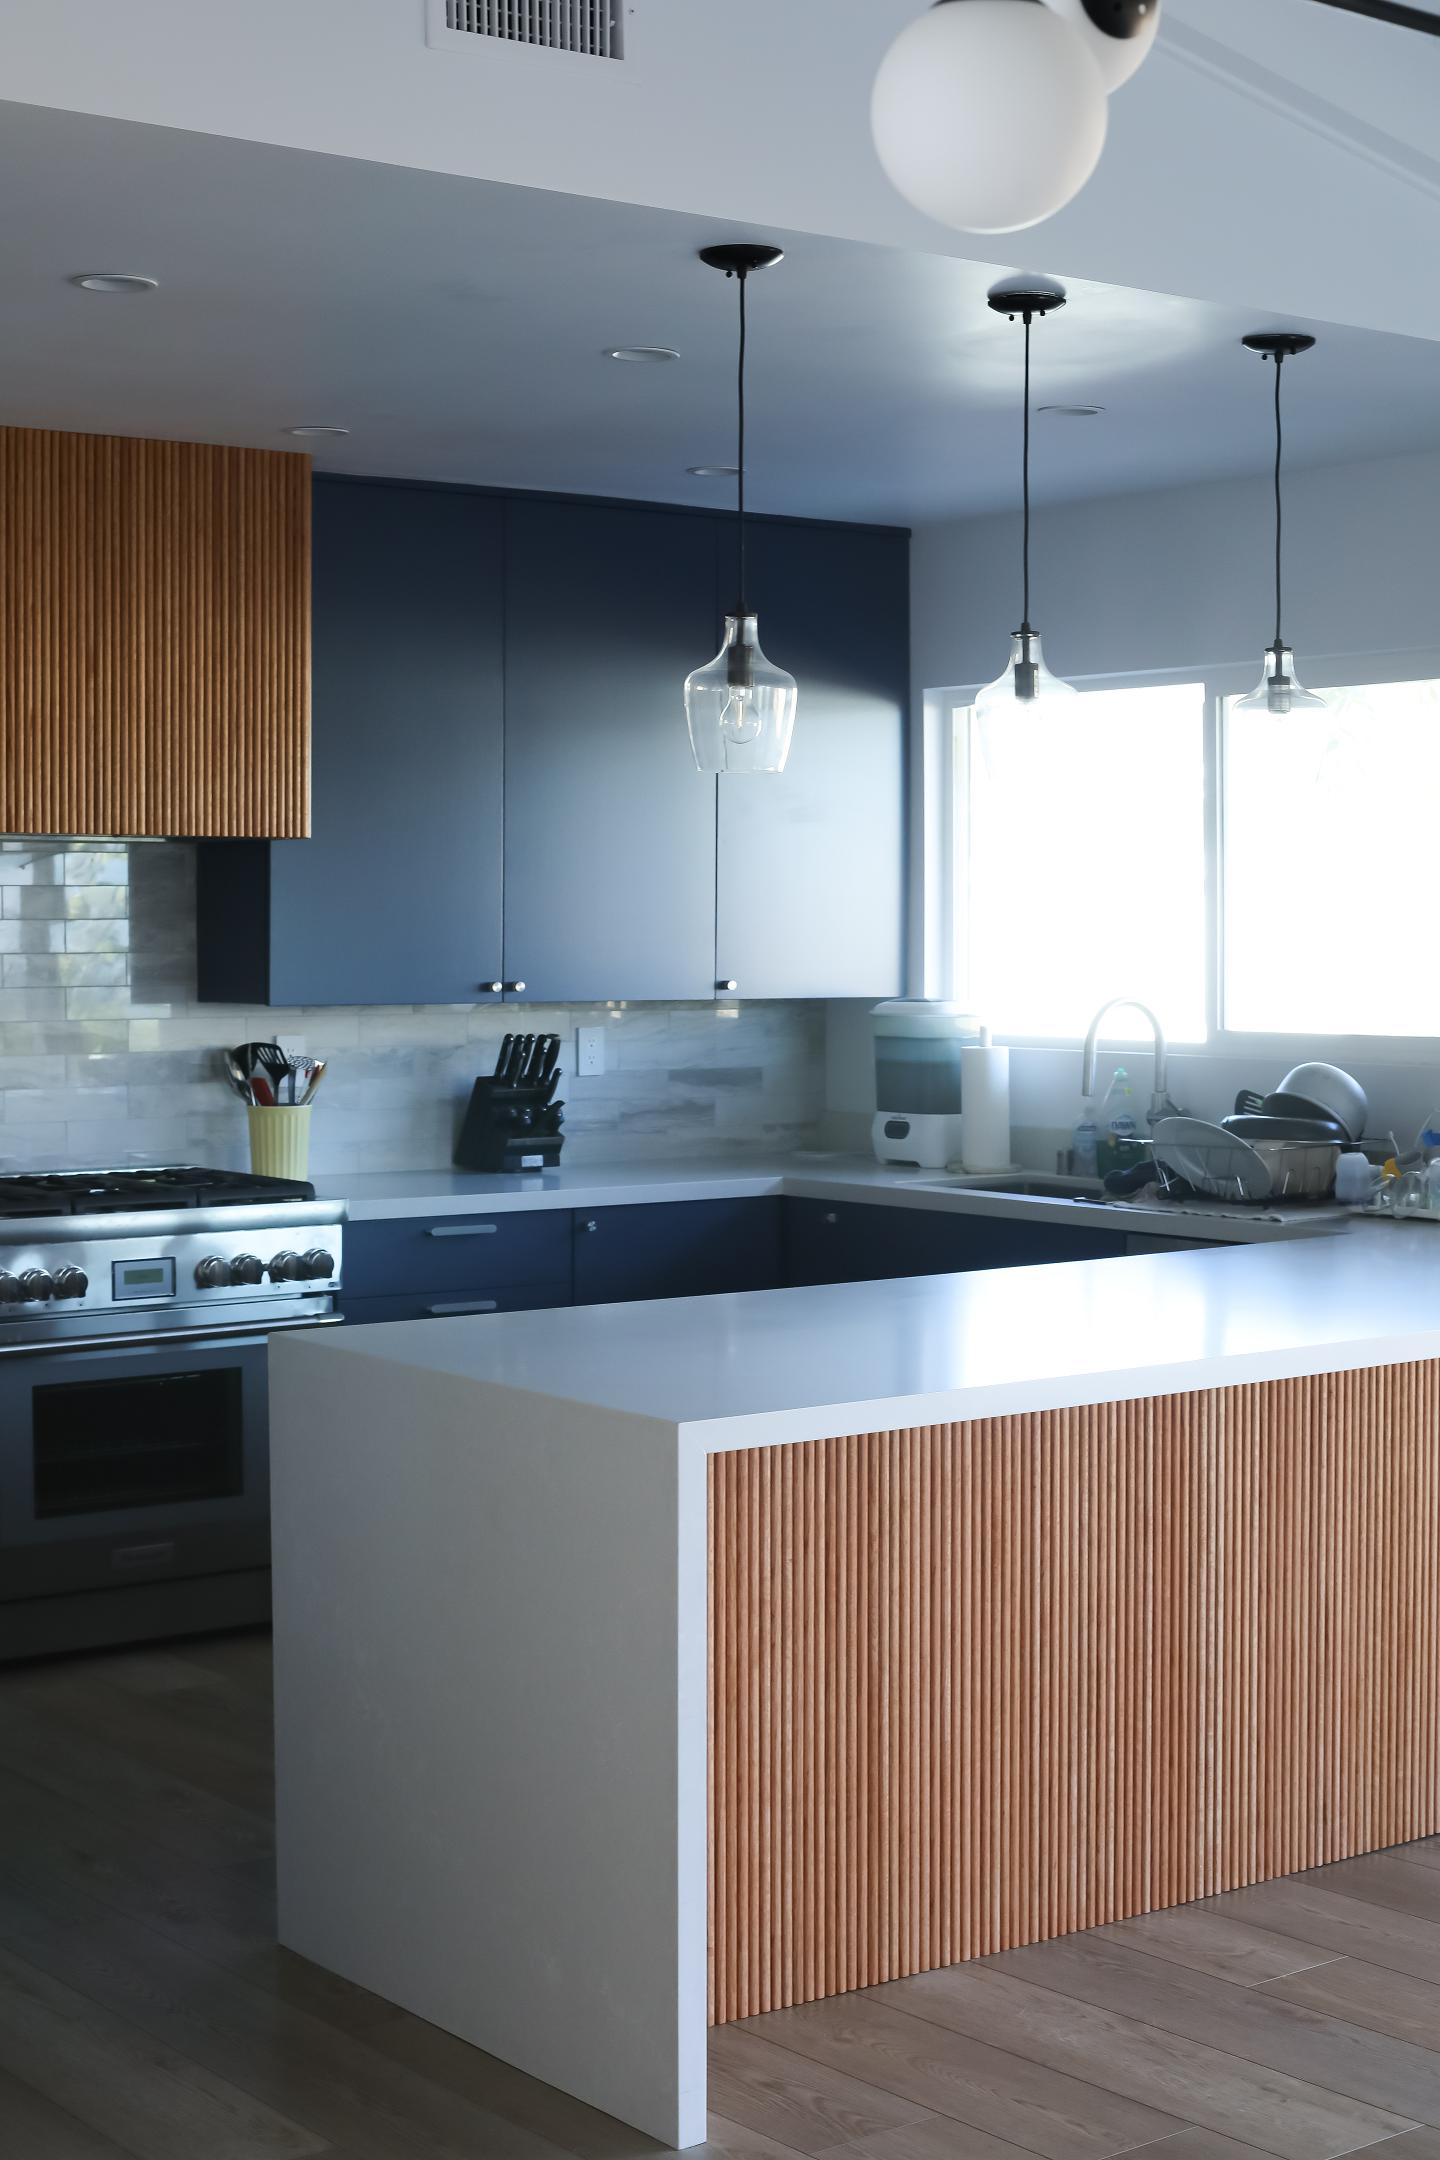 Modern kitchen with pendant lighting and blue cabinets.